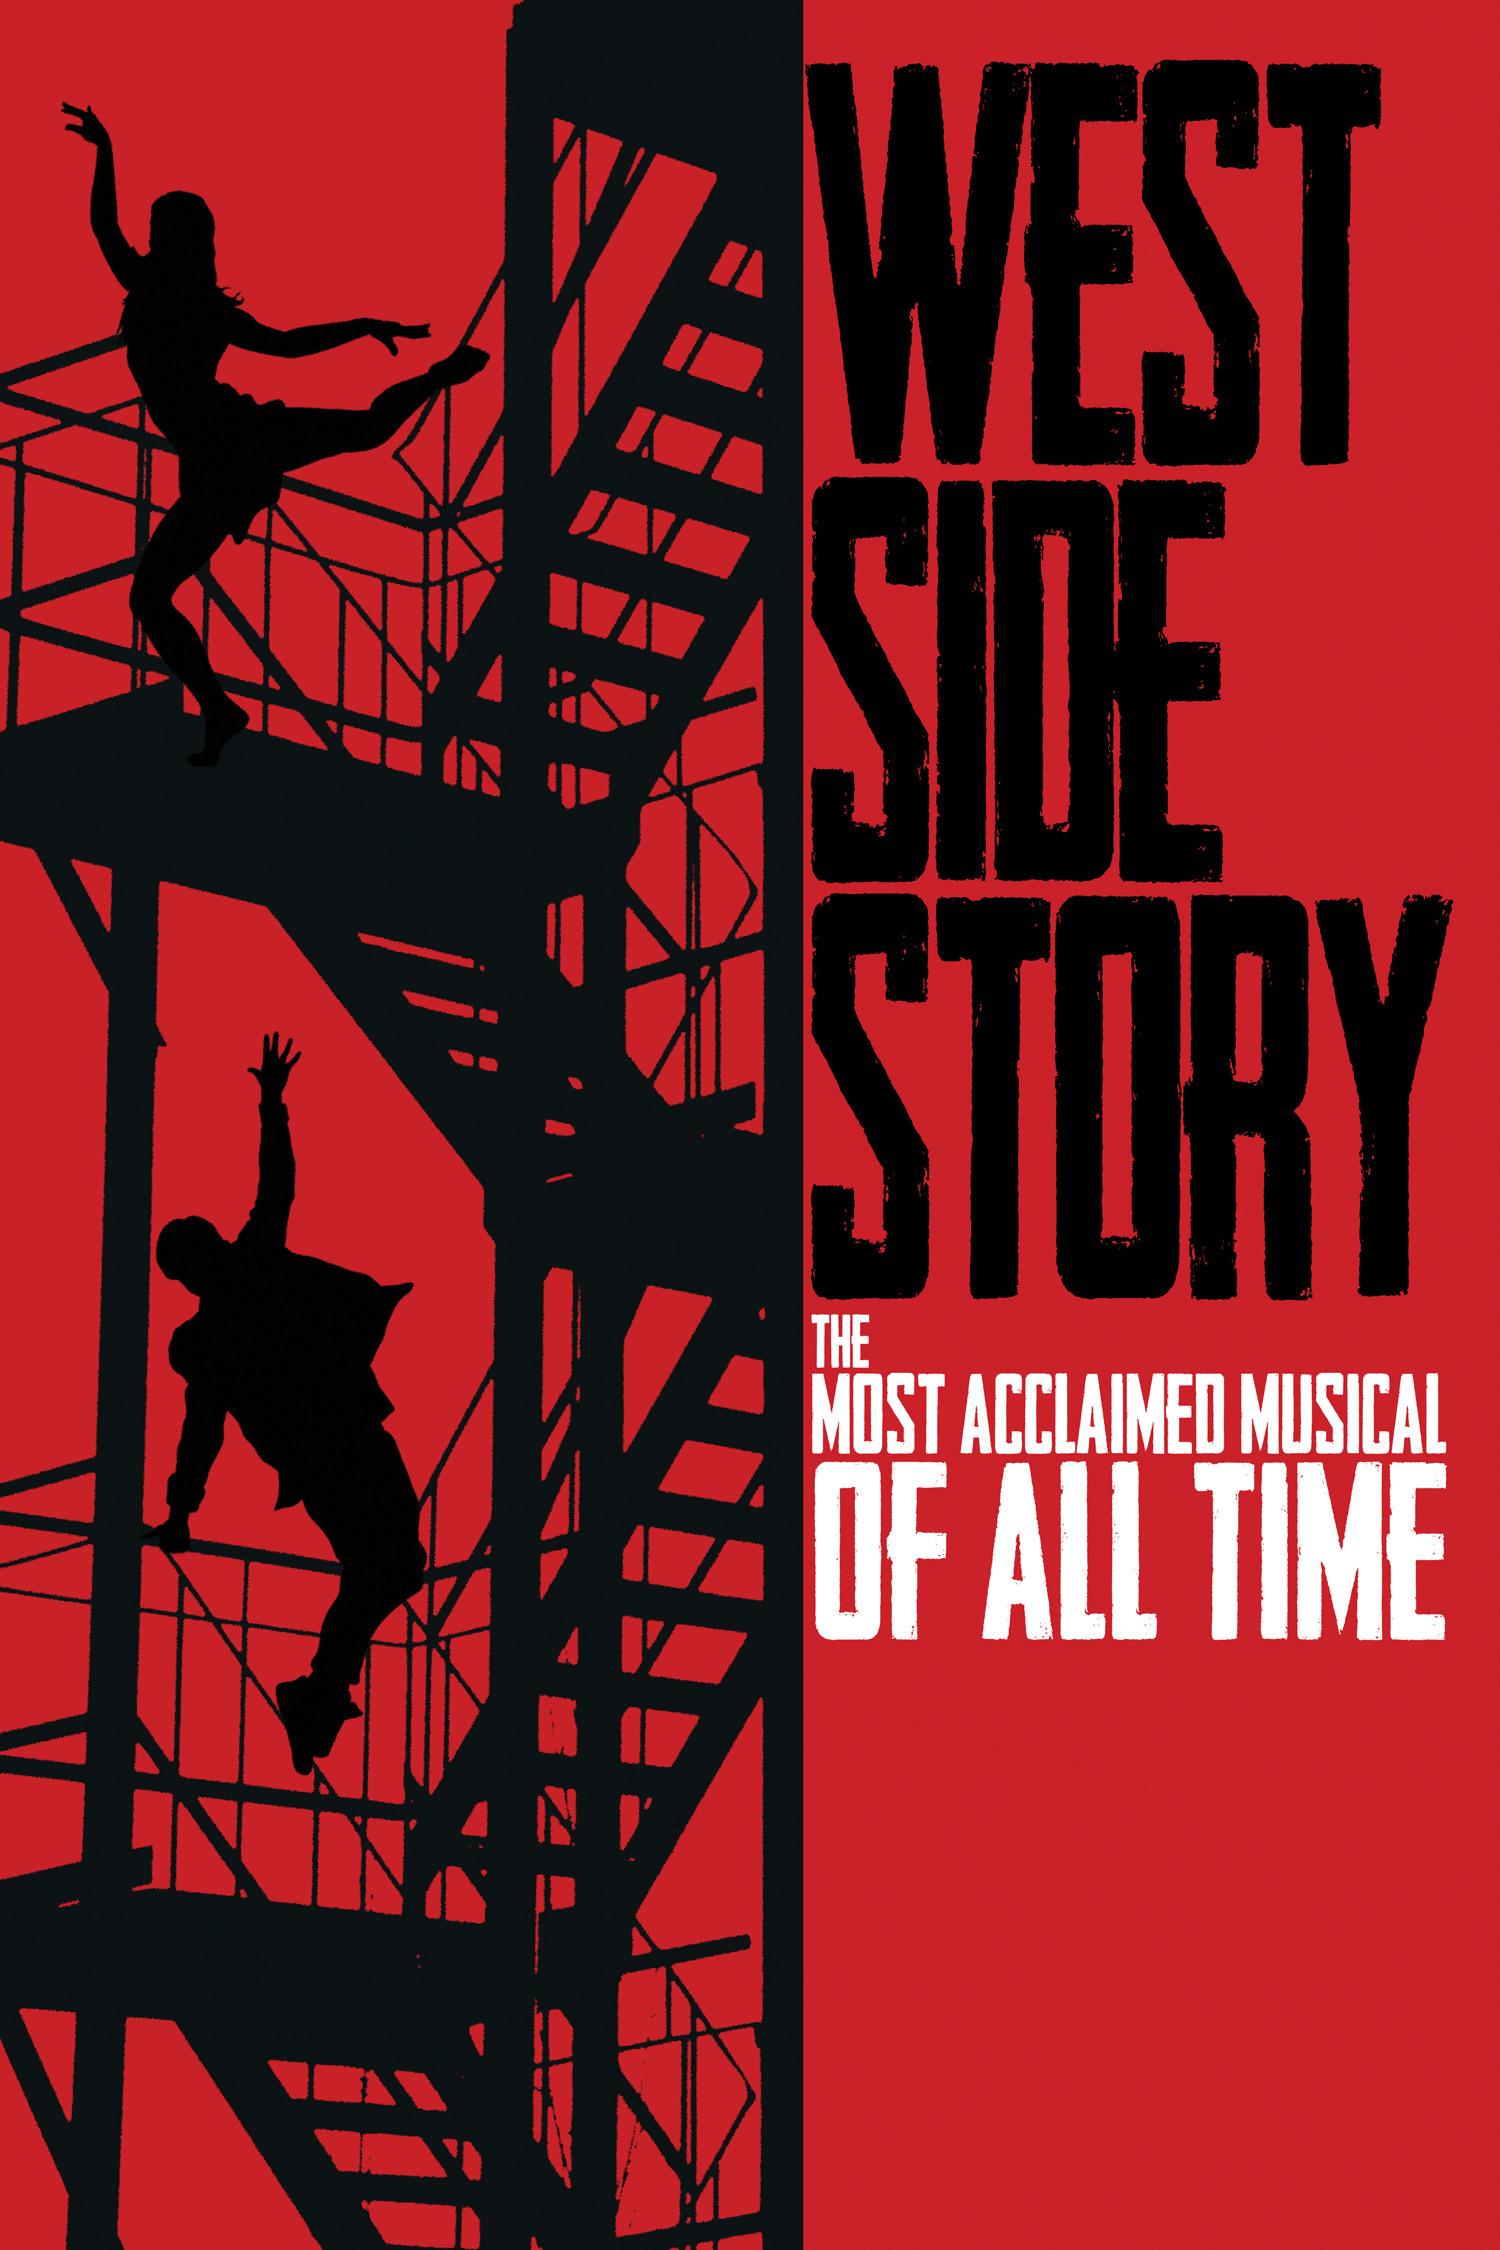 West Side Story Background